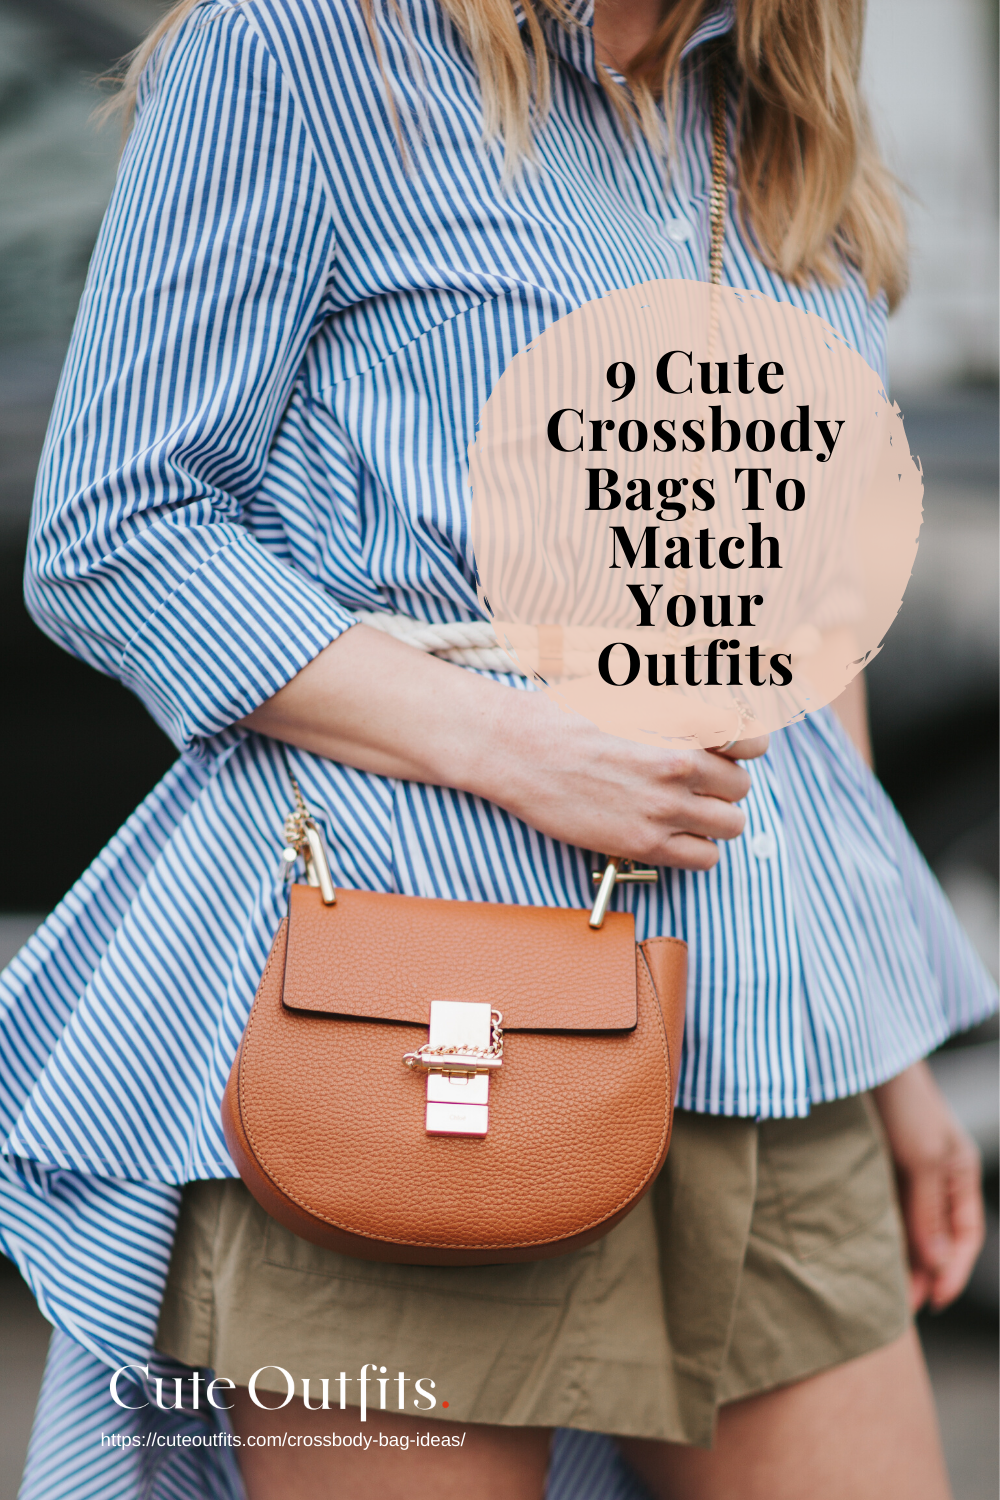 placard | 9 Cute Crossbody Bags To Match Your Outfits